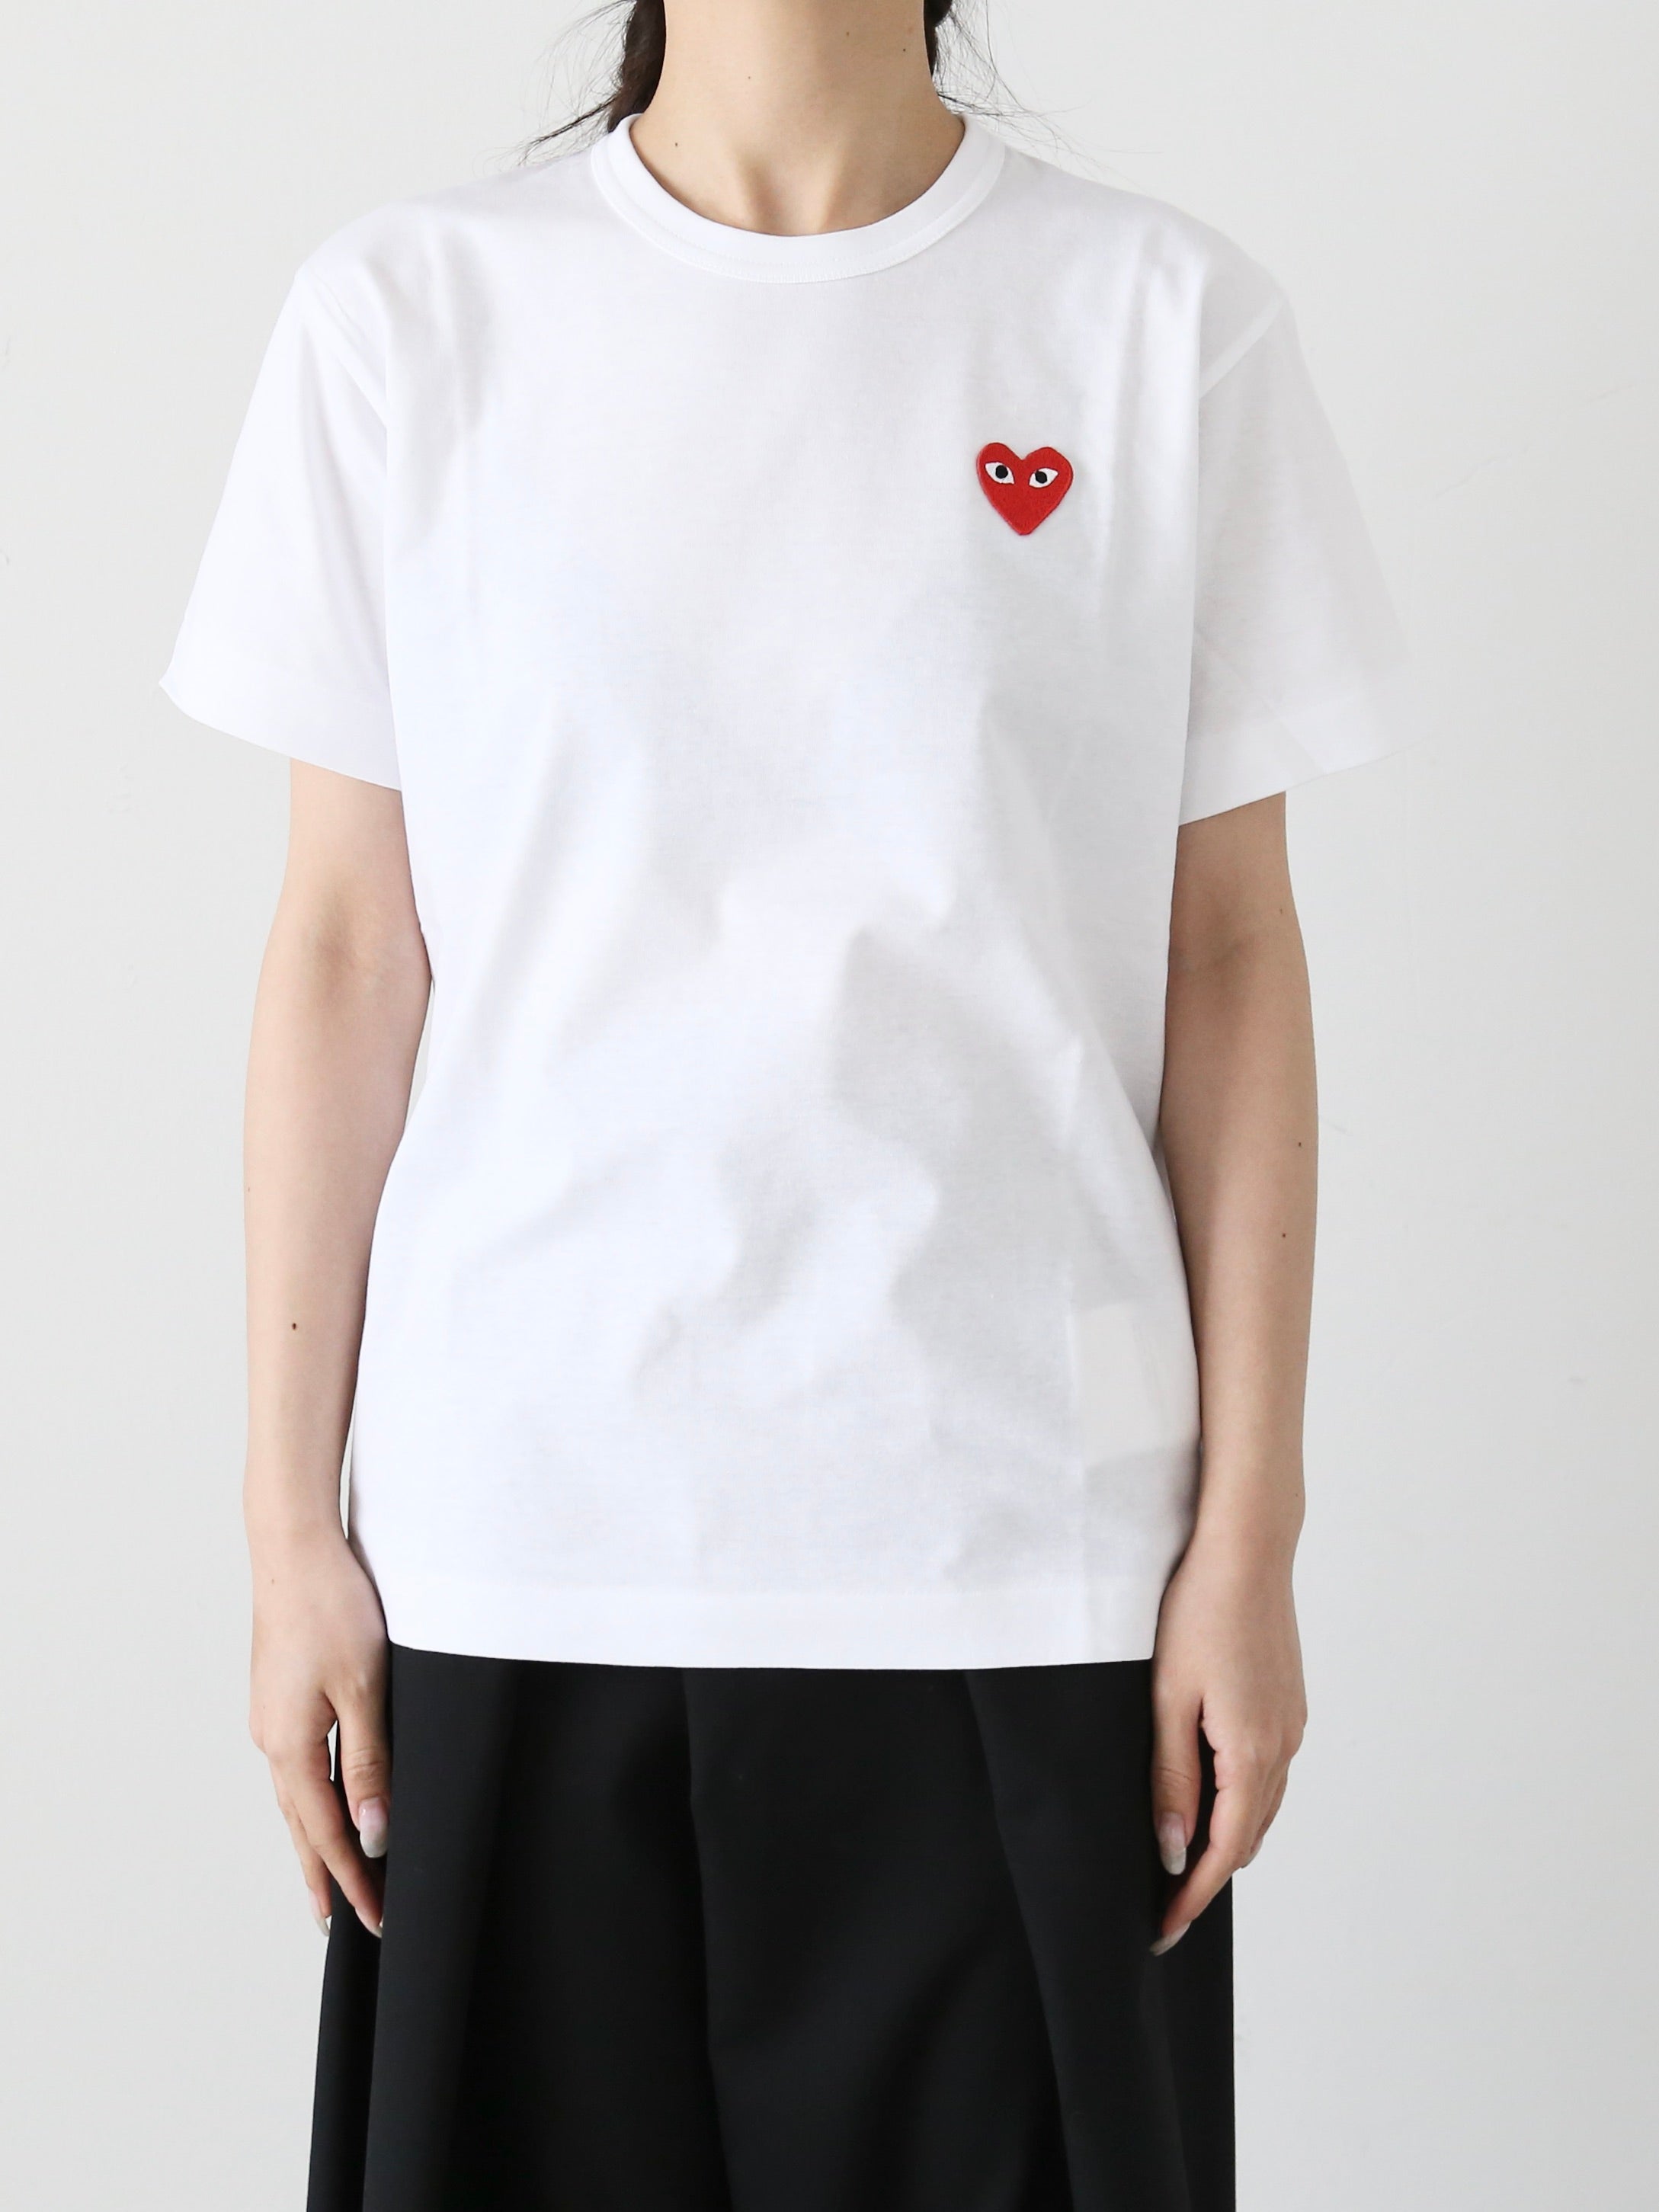 PLAY COMME des GARCONS Tシャツ(ホワイト×レッド) [AX-T108-051] – CREER